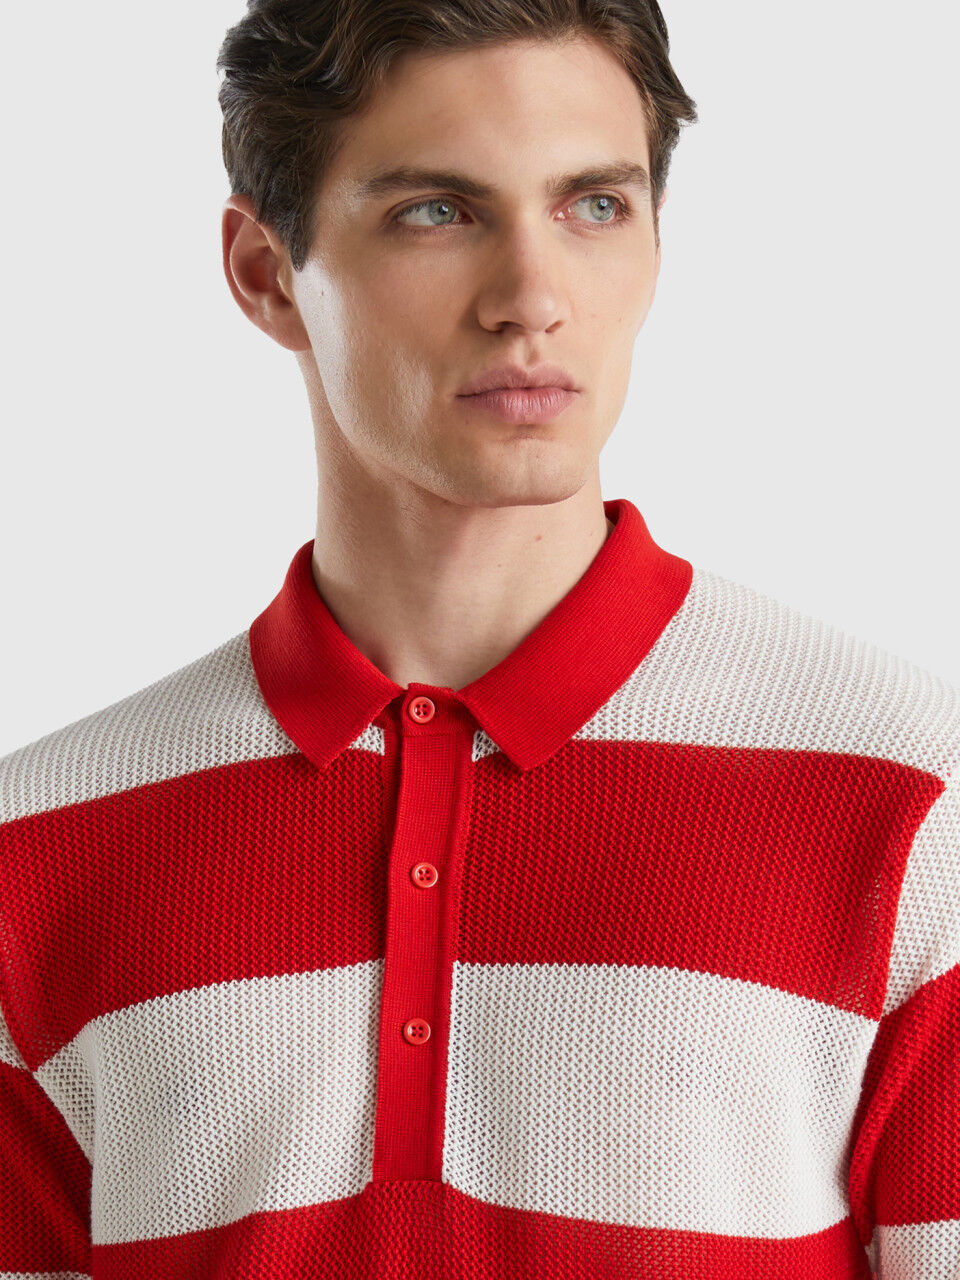 Red and white striped knit polo